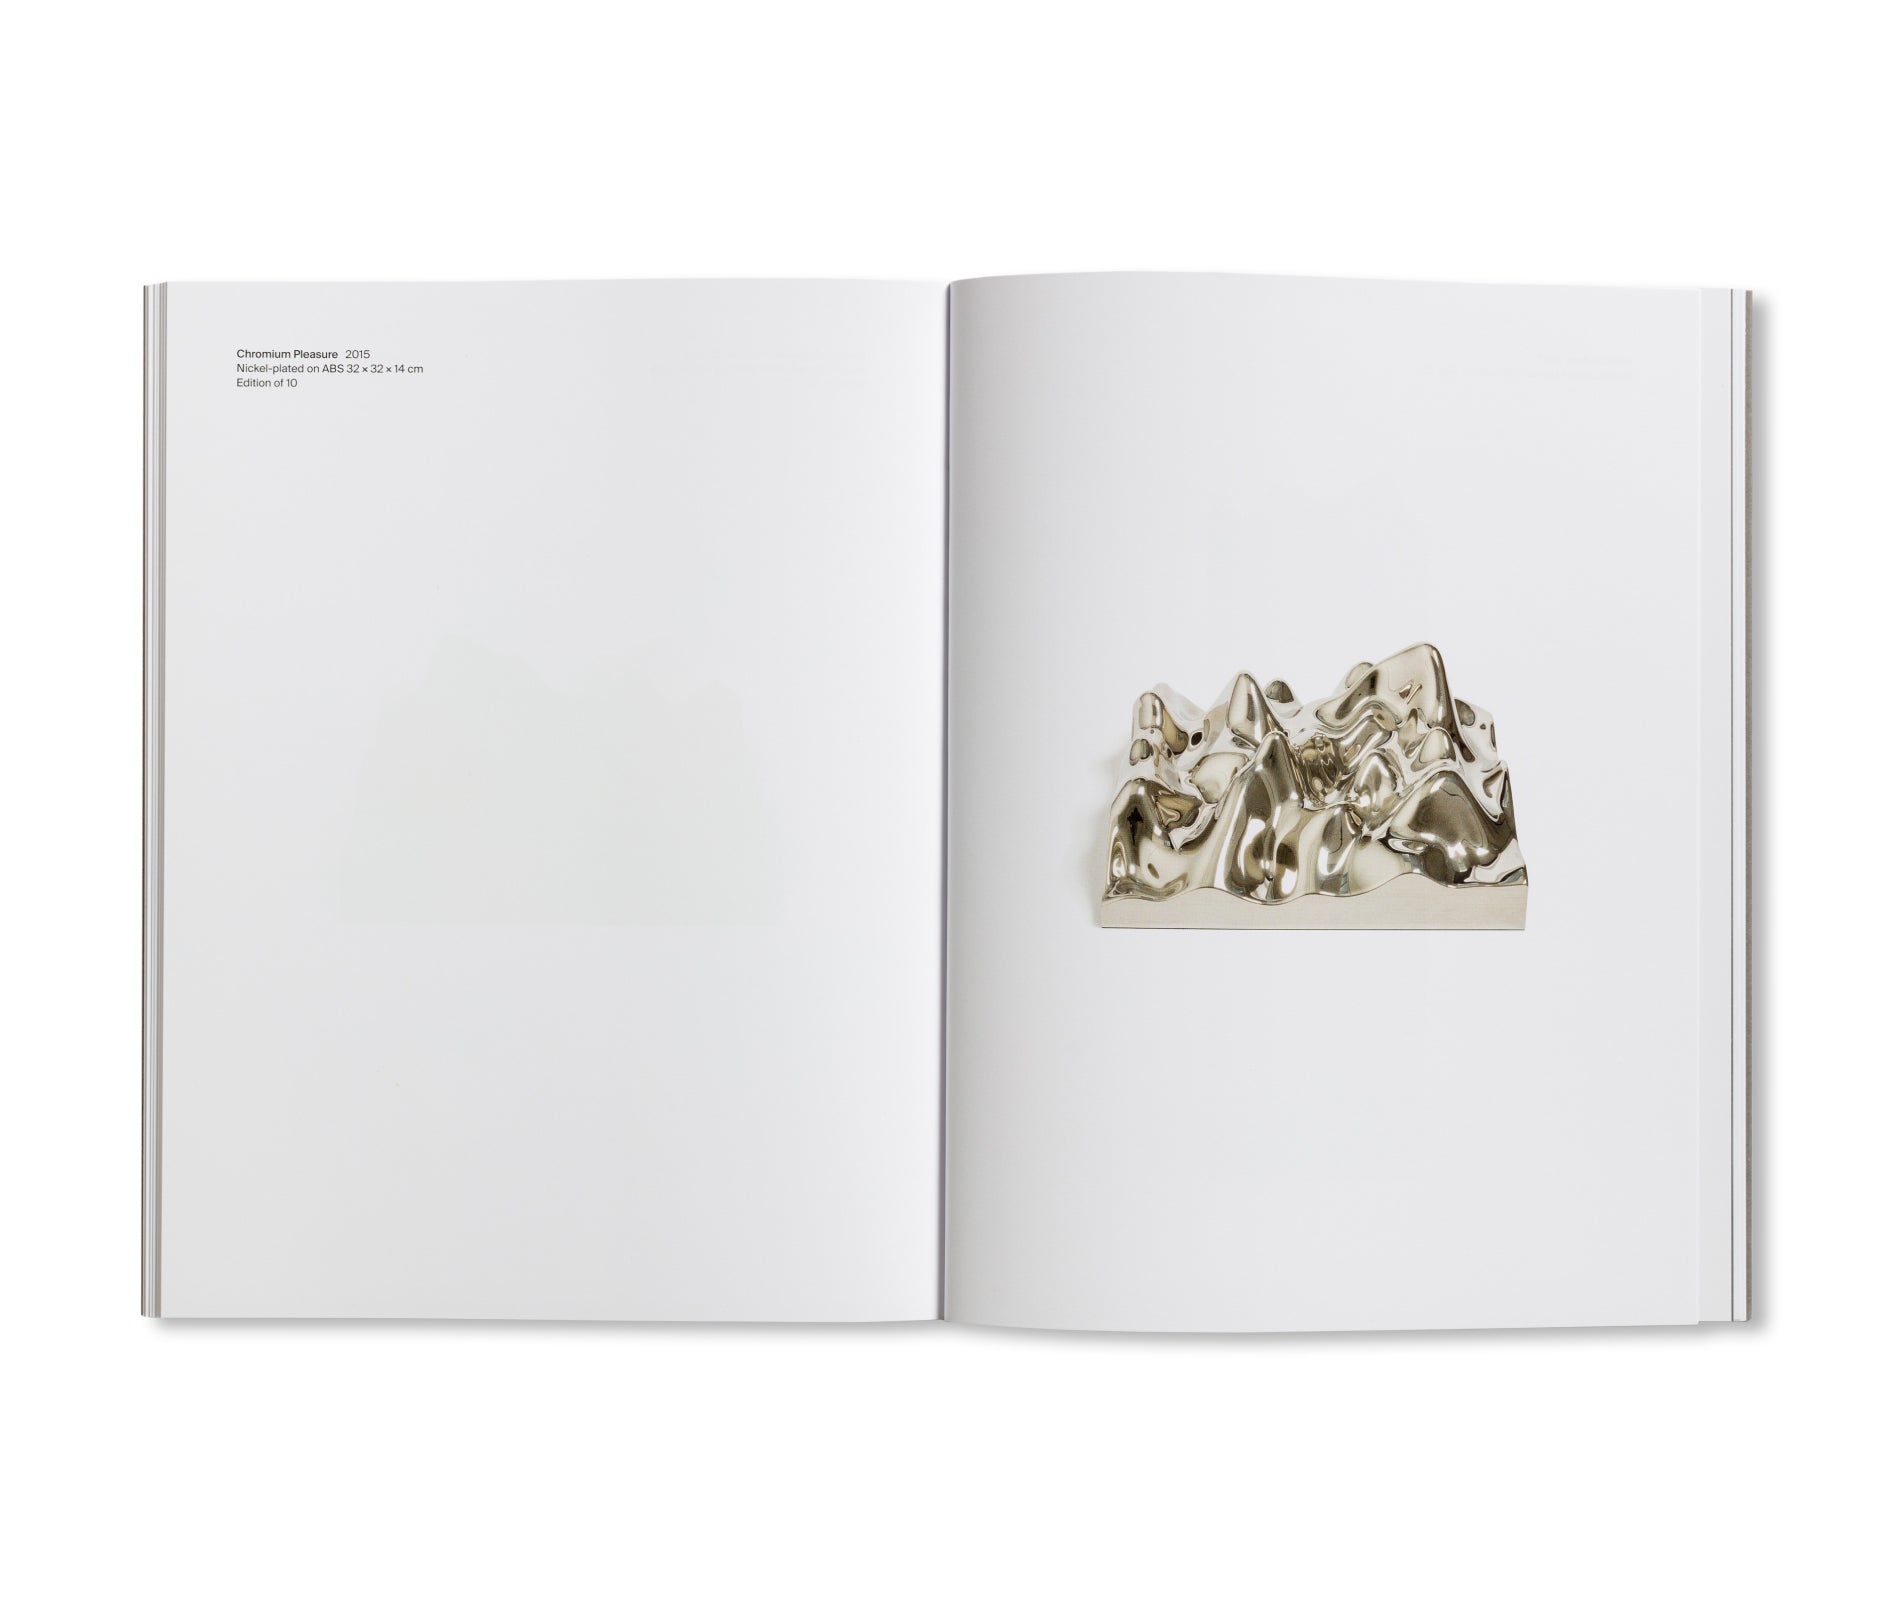 PRINTS AND MULTIPLES/ANNA BLESSMANN AND PETER SAVILLE by Peter Saville